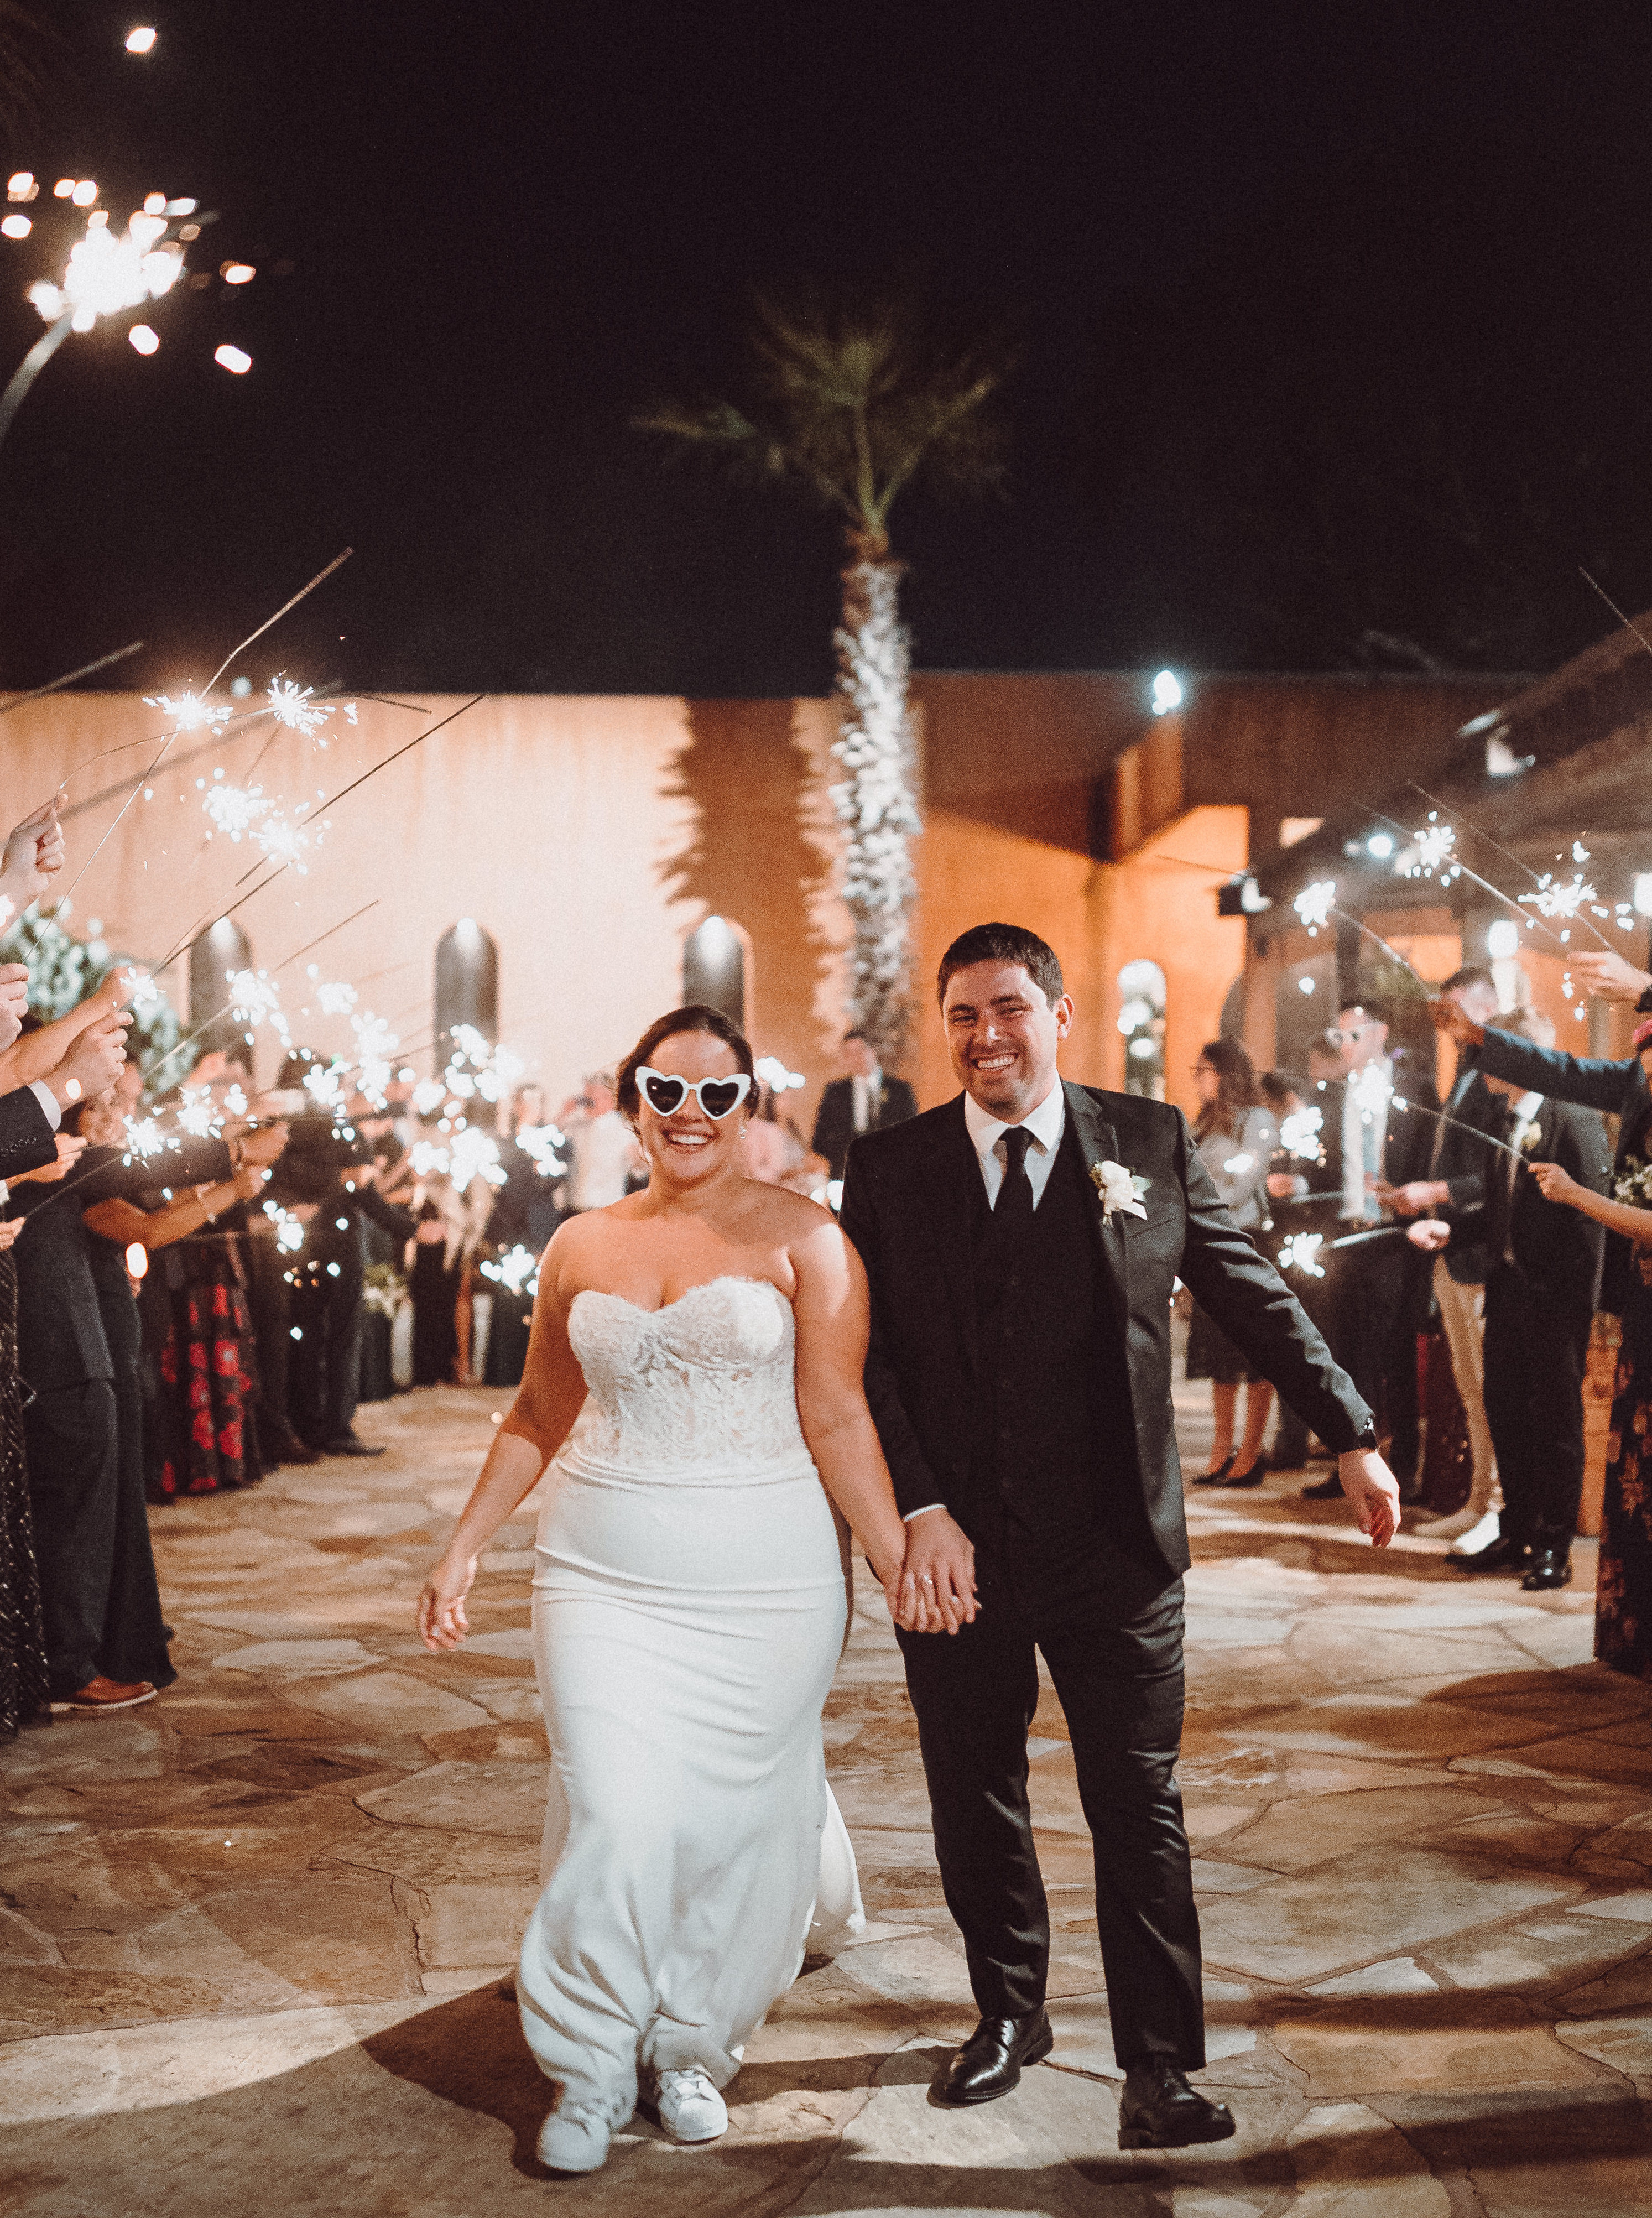 A bride and groom hold hands at their grand exit while their guests hold sparklers in the air.